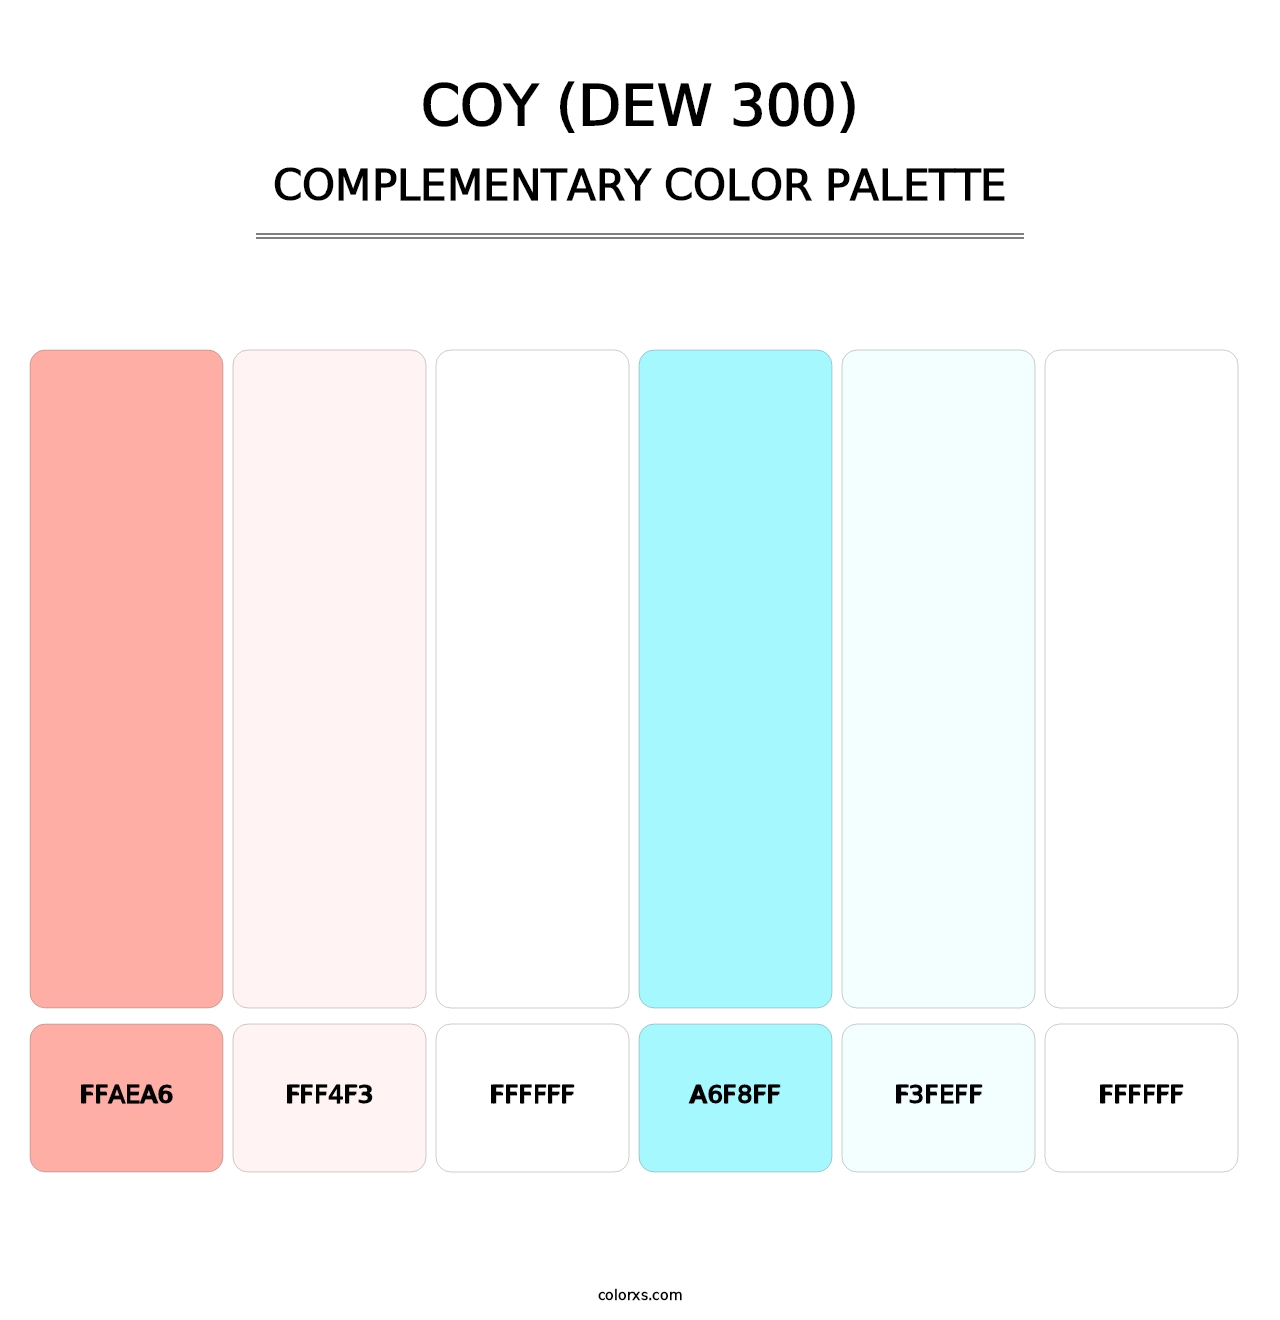 Coy (DEW 300) - Complementary Color Palette